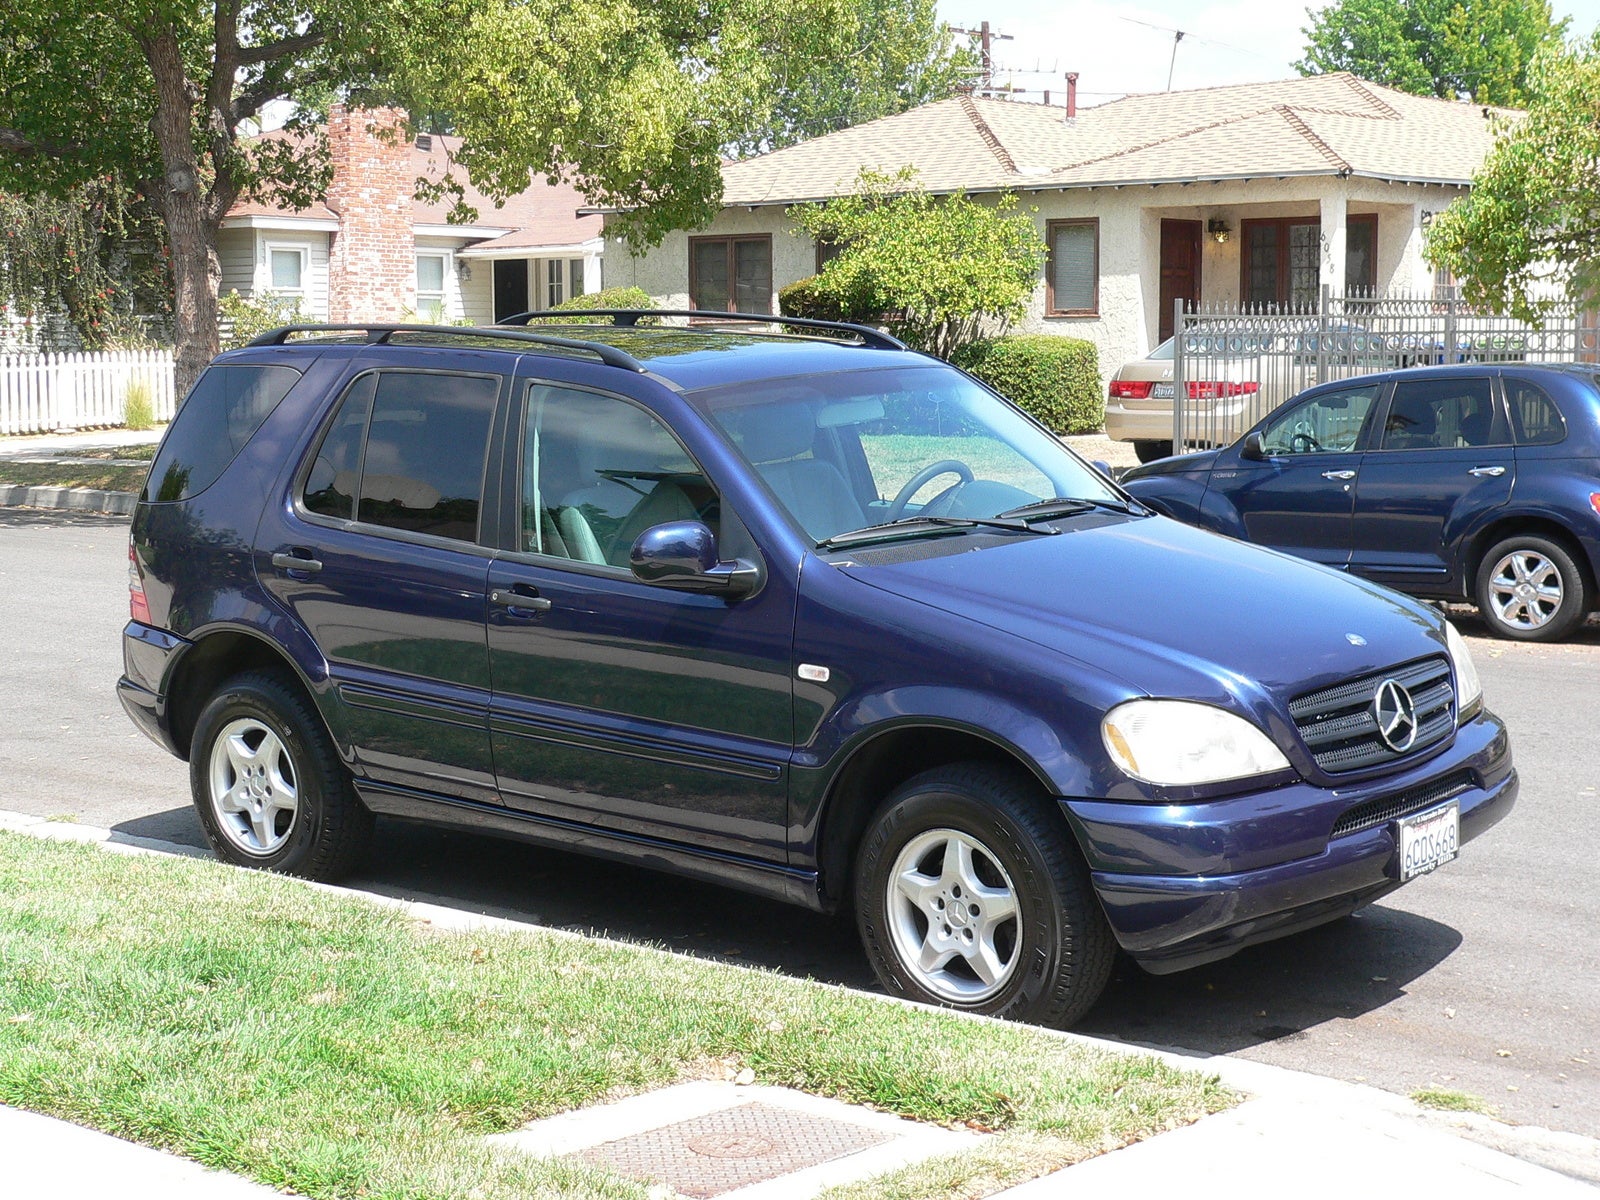 2000 Mercedes-Benz M-Class 4 Dr ML320 AWD SUV - Pictures - Picture of ...